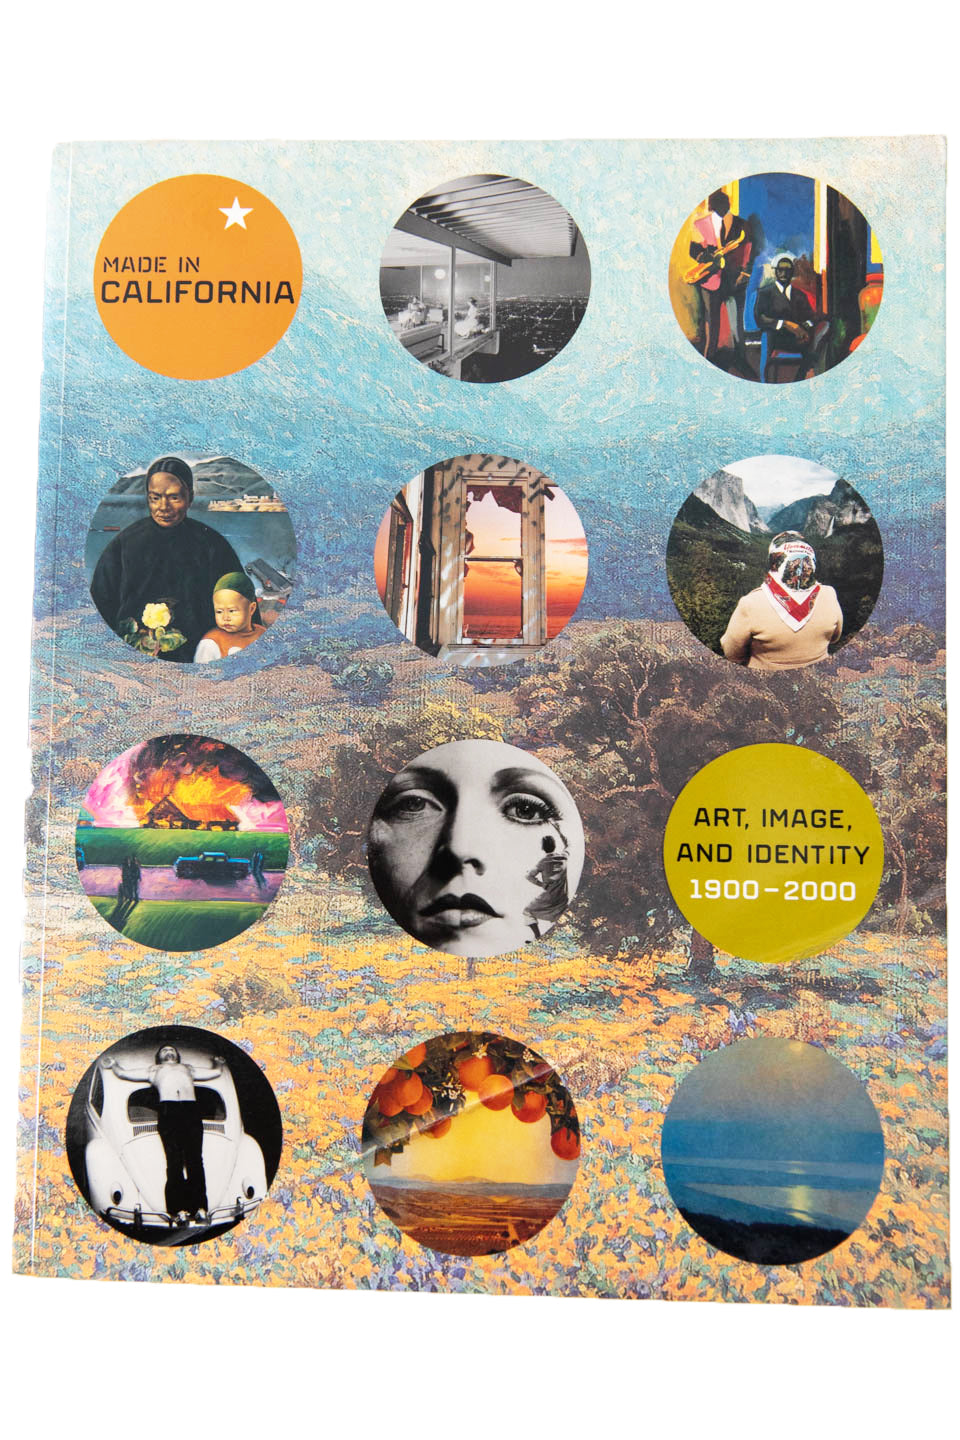 MADE IN CALIFORNIA | ART, IMAGE, AND IDENTITY 1900-2000